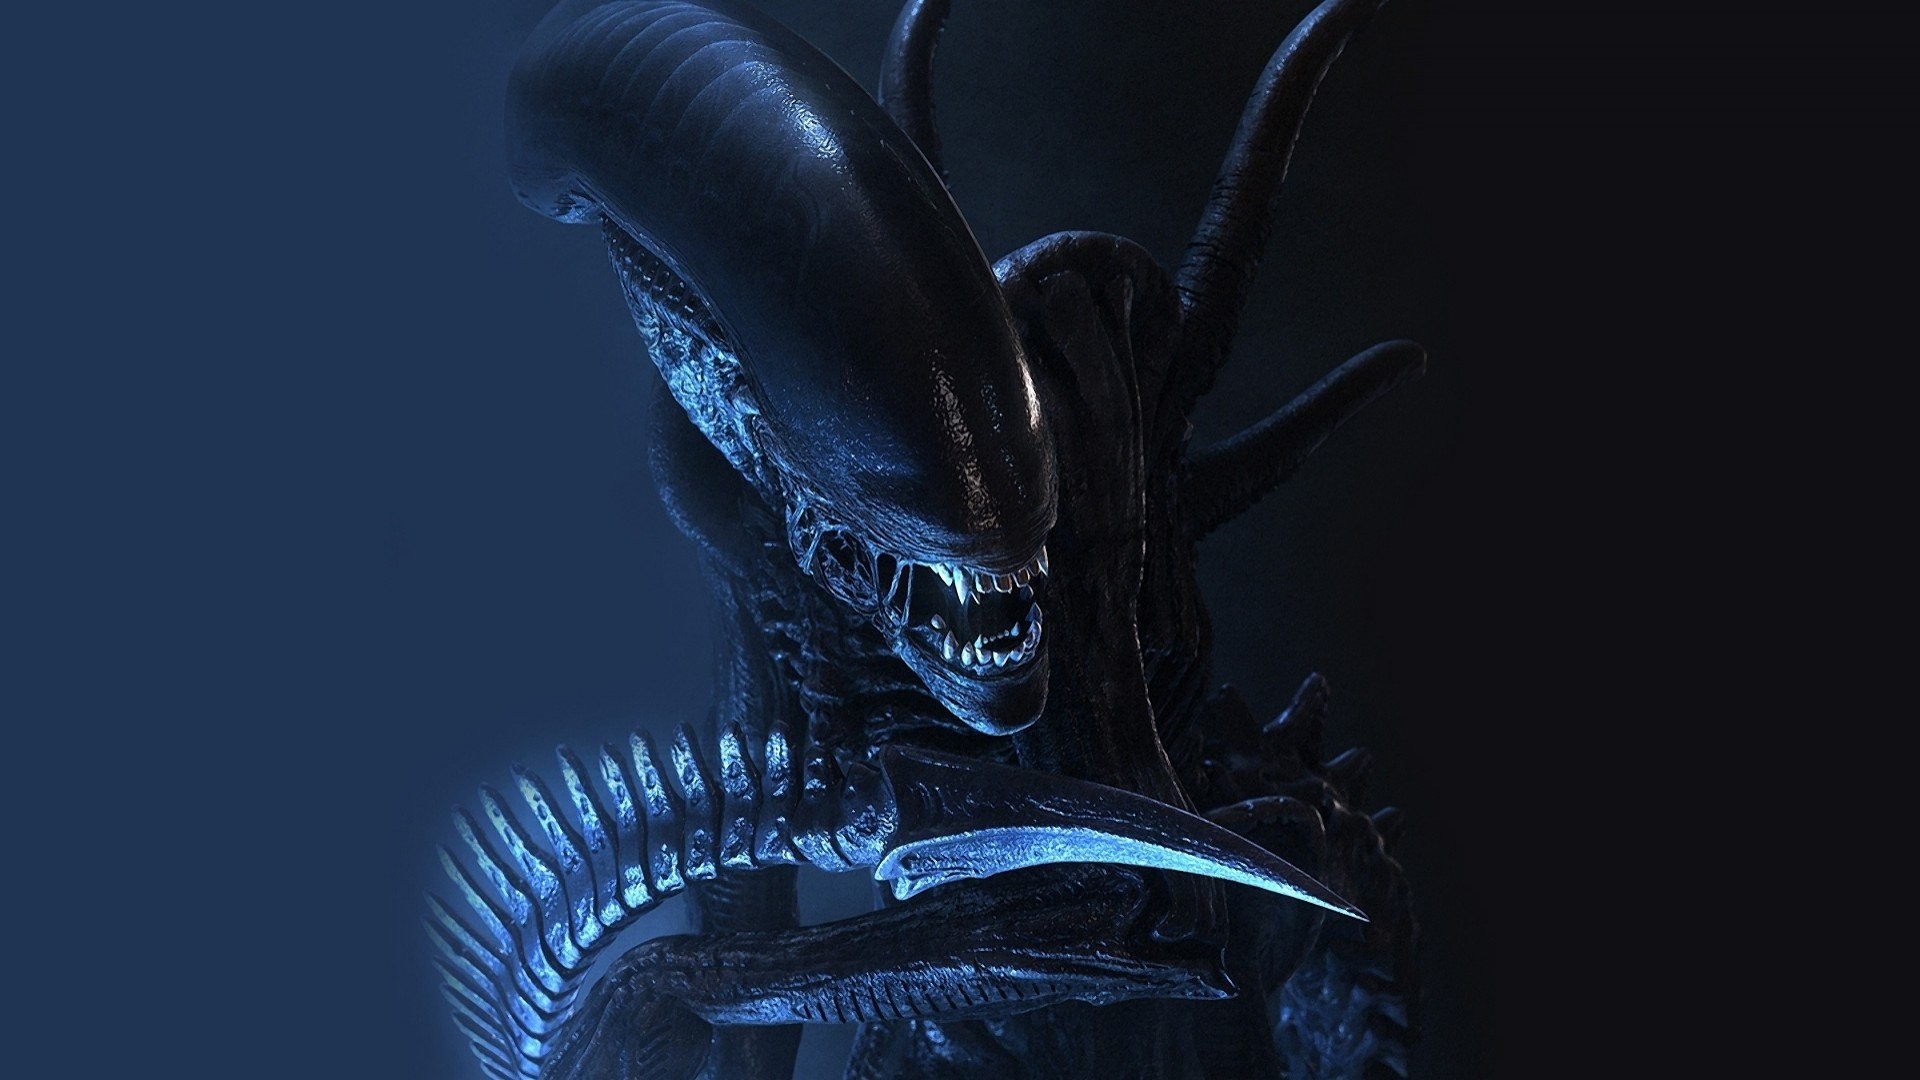 1920x1080 Hr Giger wallpapers for your Debian or Linux Mint desktop. These .